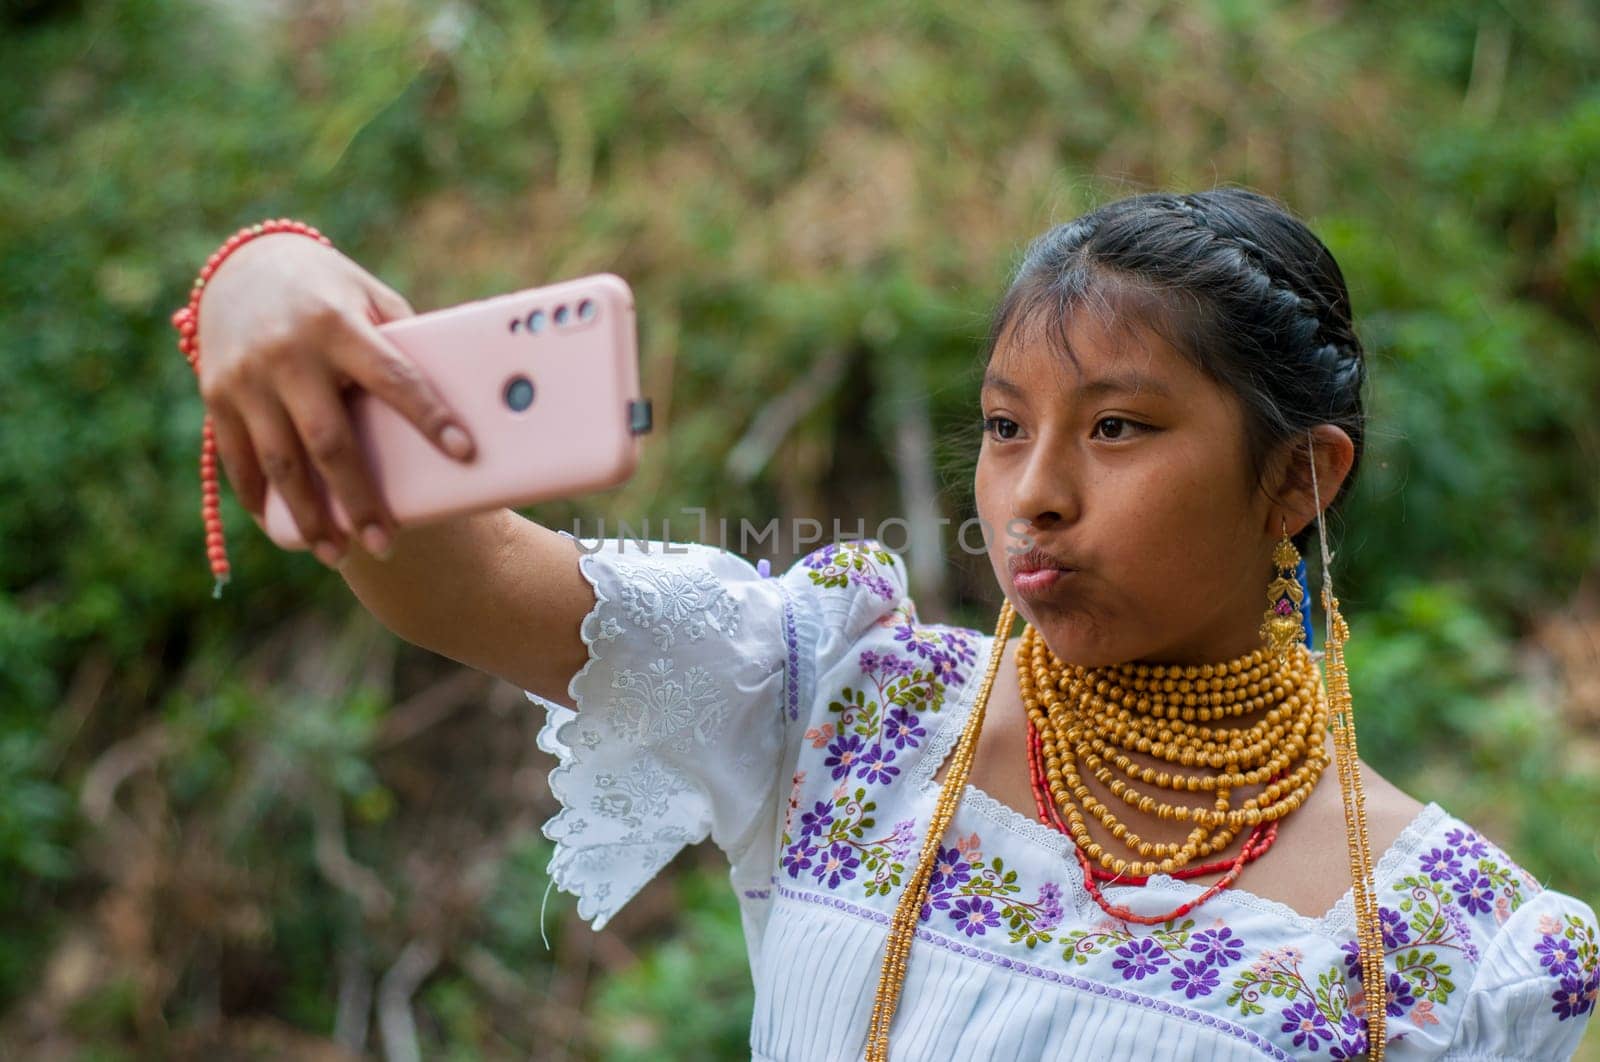 INDIGENOUS YOUNG MAN smiling in the middle of nature taking a selfie with a cell phone wearing clothes from his native community. by Raulmartin